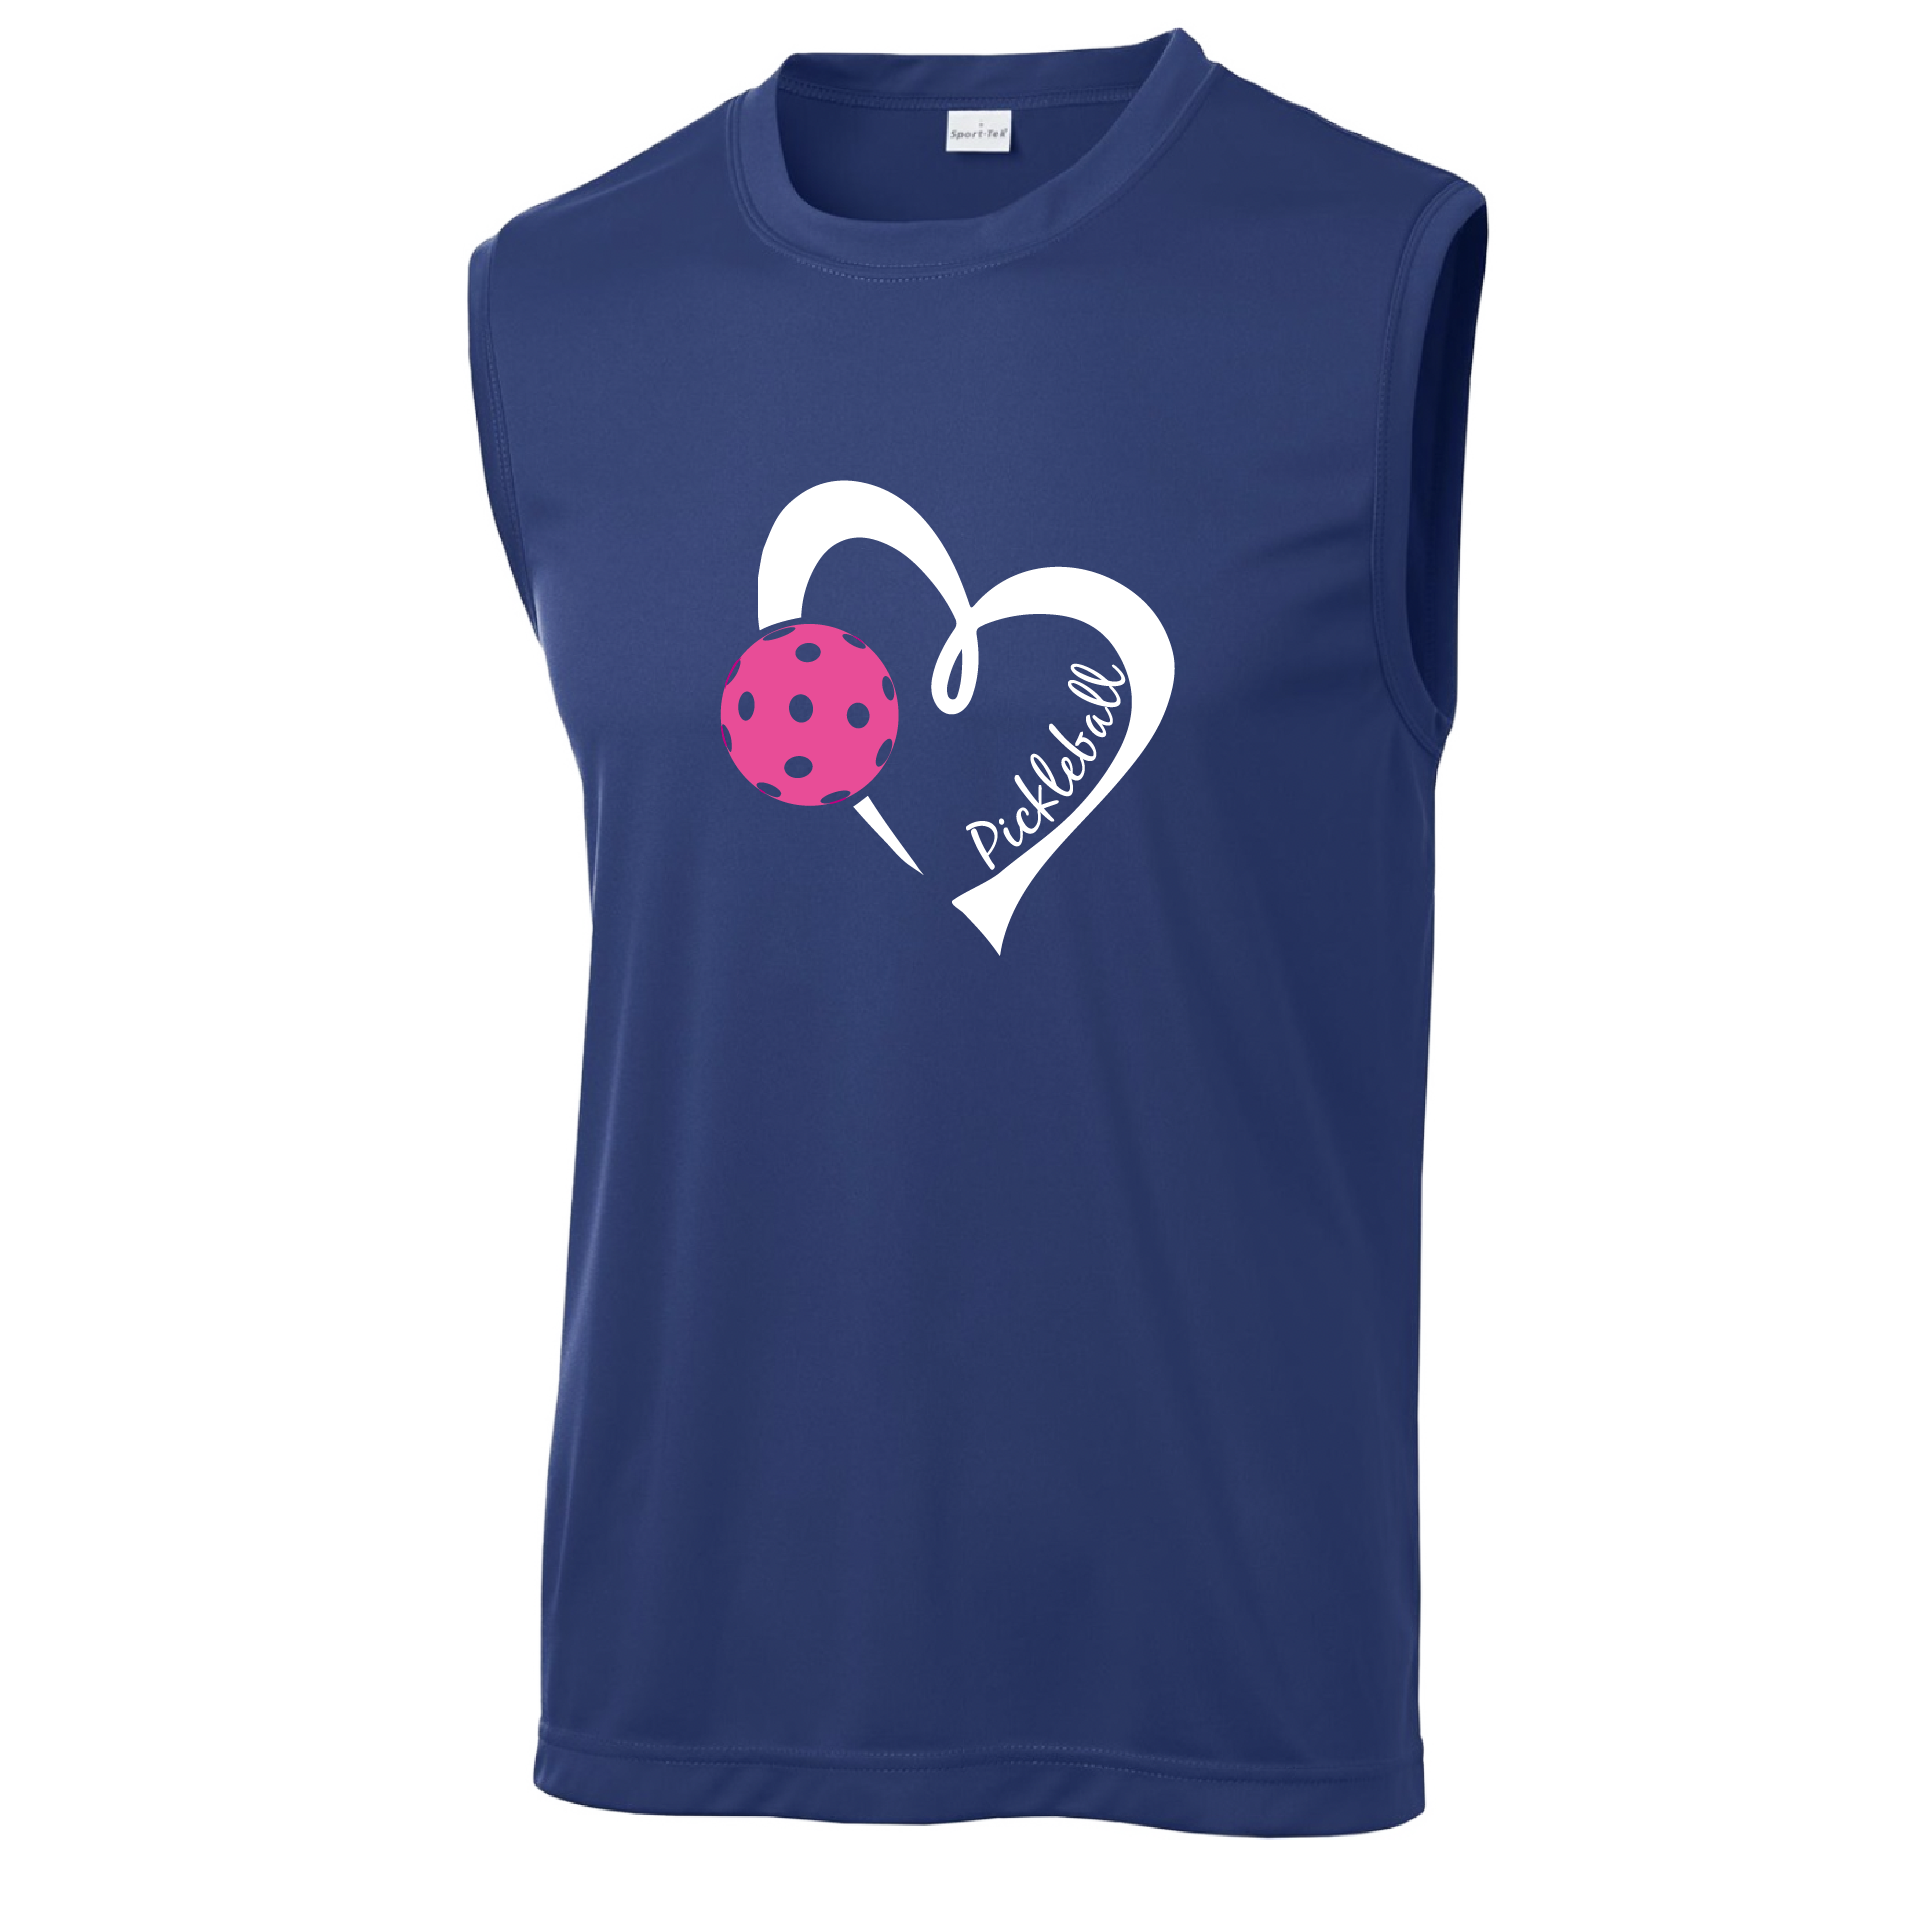 Pickleball Design: Heart with Pickleball  Men's Style: Sleeveless  Shirts are lightweight, roomy and highly breathable. These moisture-wicking shirts are designed for athletic performance. They feature PosiCharge technology to lock in color and prevent logos from fading. Removable tag and set-in sleeves for comfort.